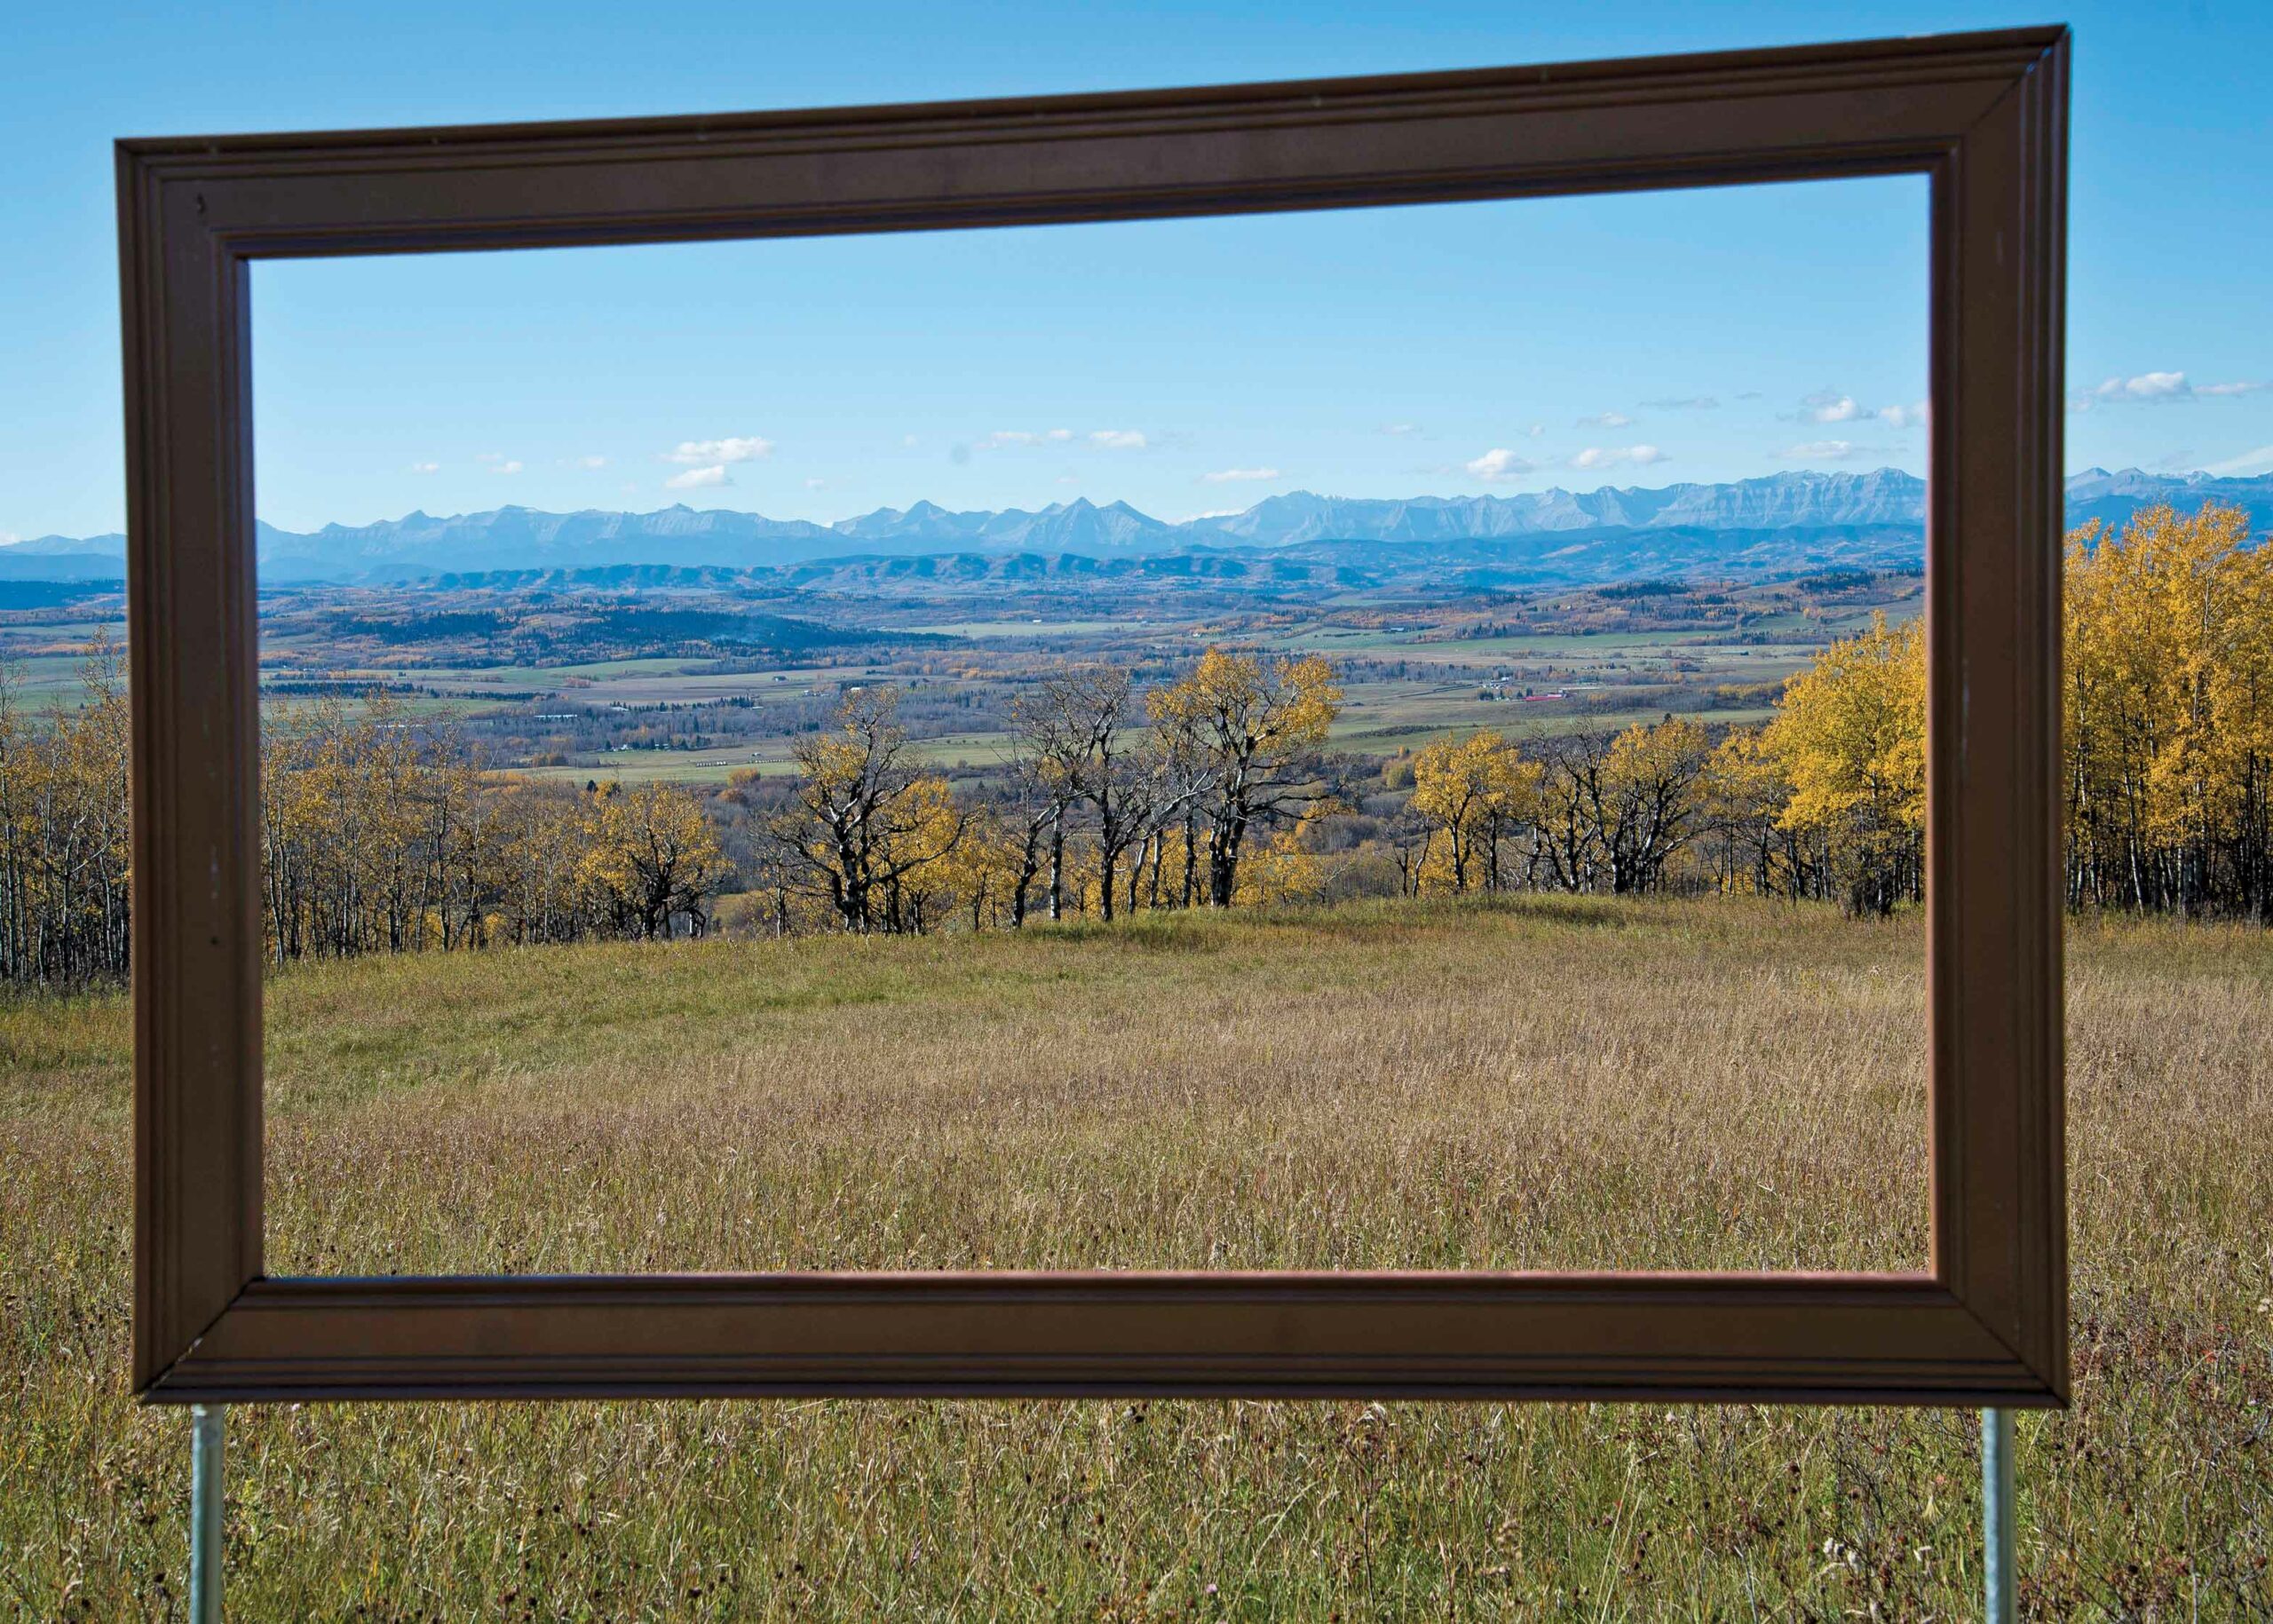 A picture frame in the foothills frames the entire Rocky Mountain vista.